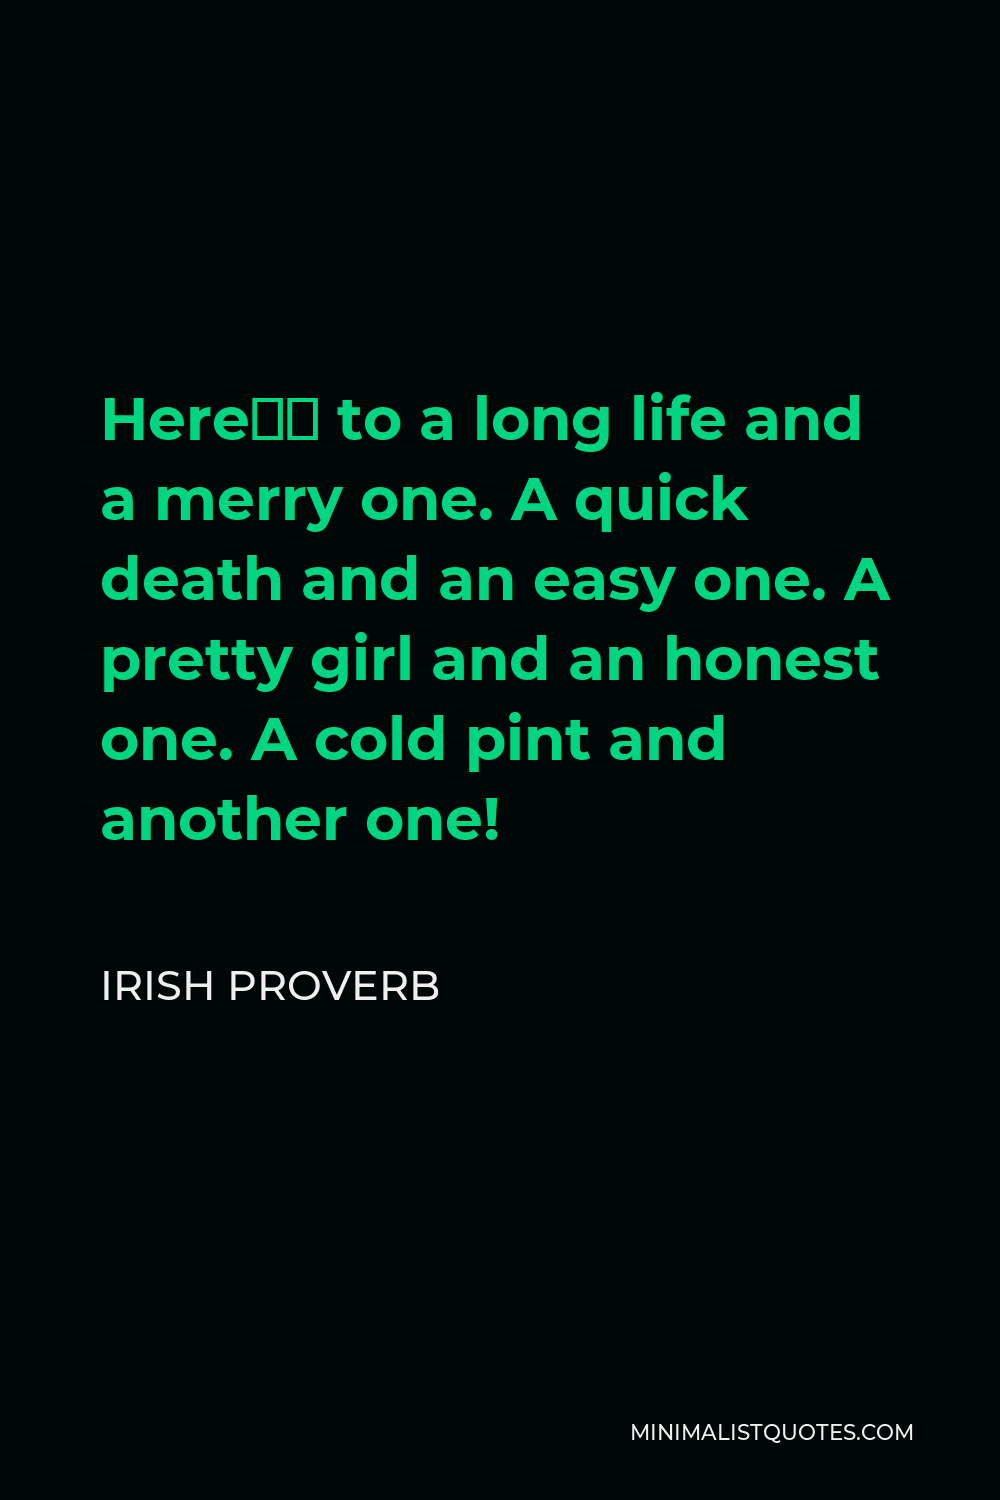 Irish Proverb Quote - Here’s to a long life and a merry one. A quick death and an easy one. A pretty girl and an honest one. A cold pint and another one!